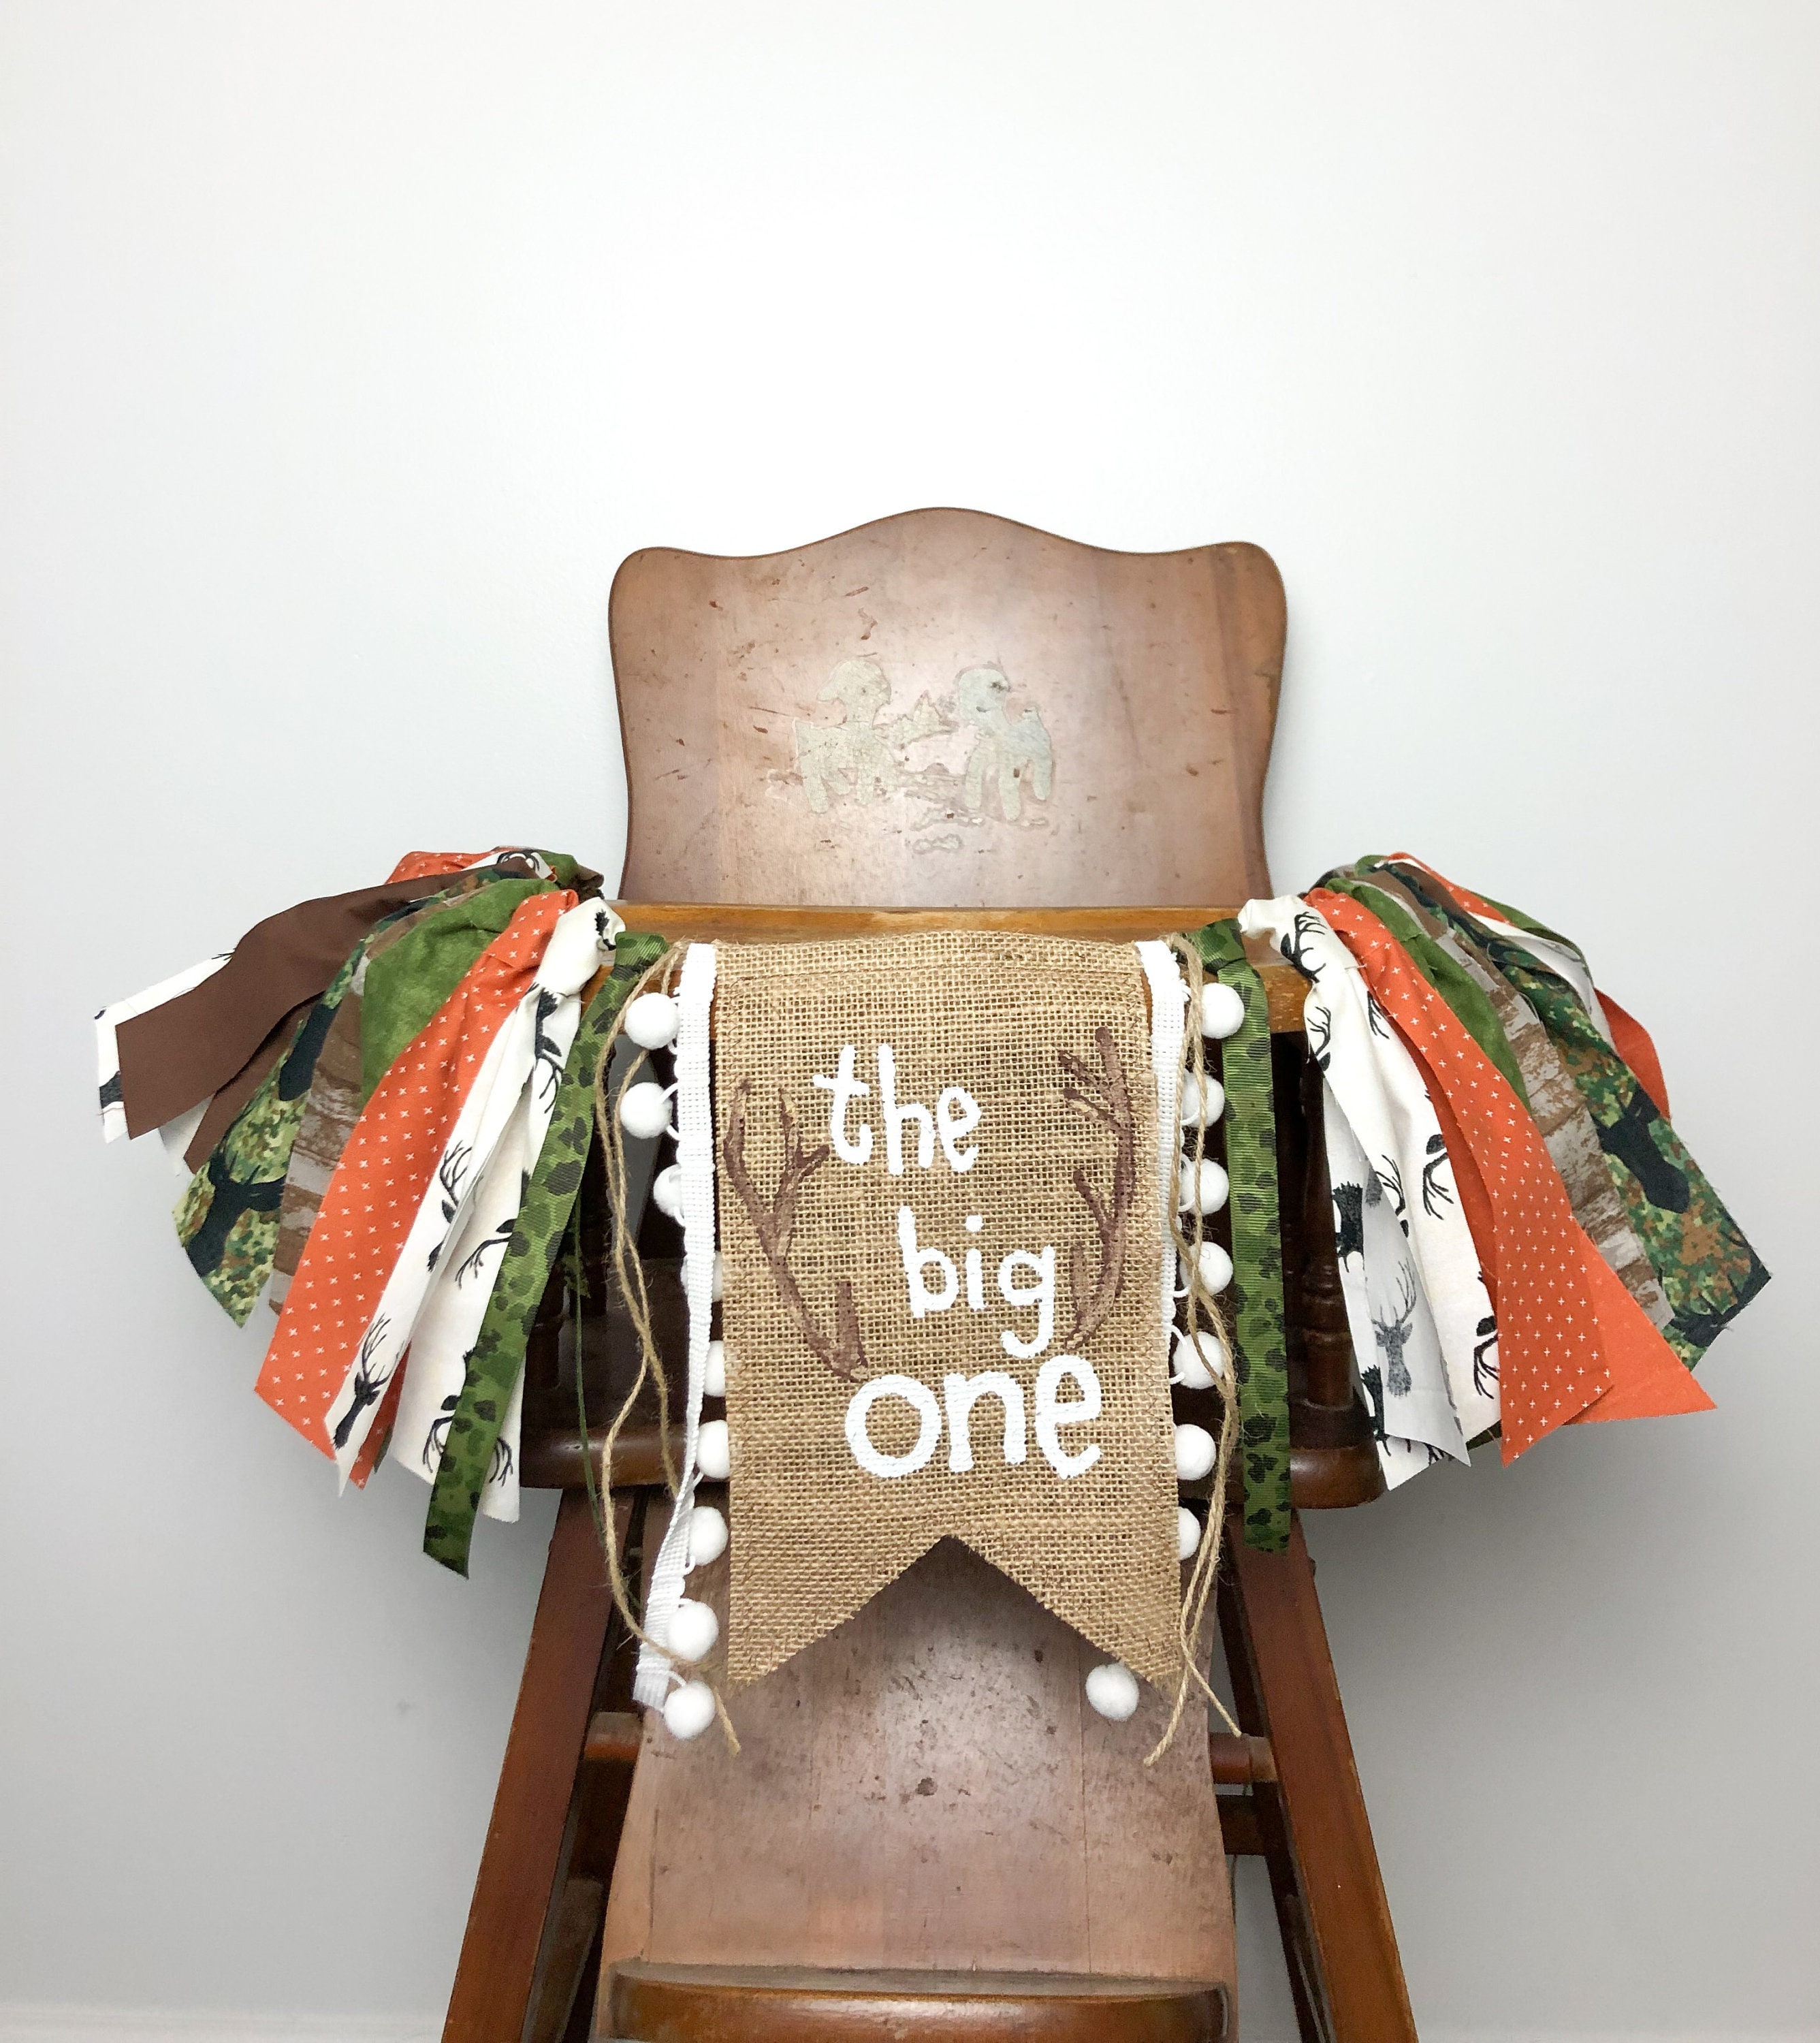 Taco 'bout the Big One First Birthday Highchair Banner